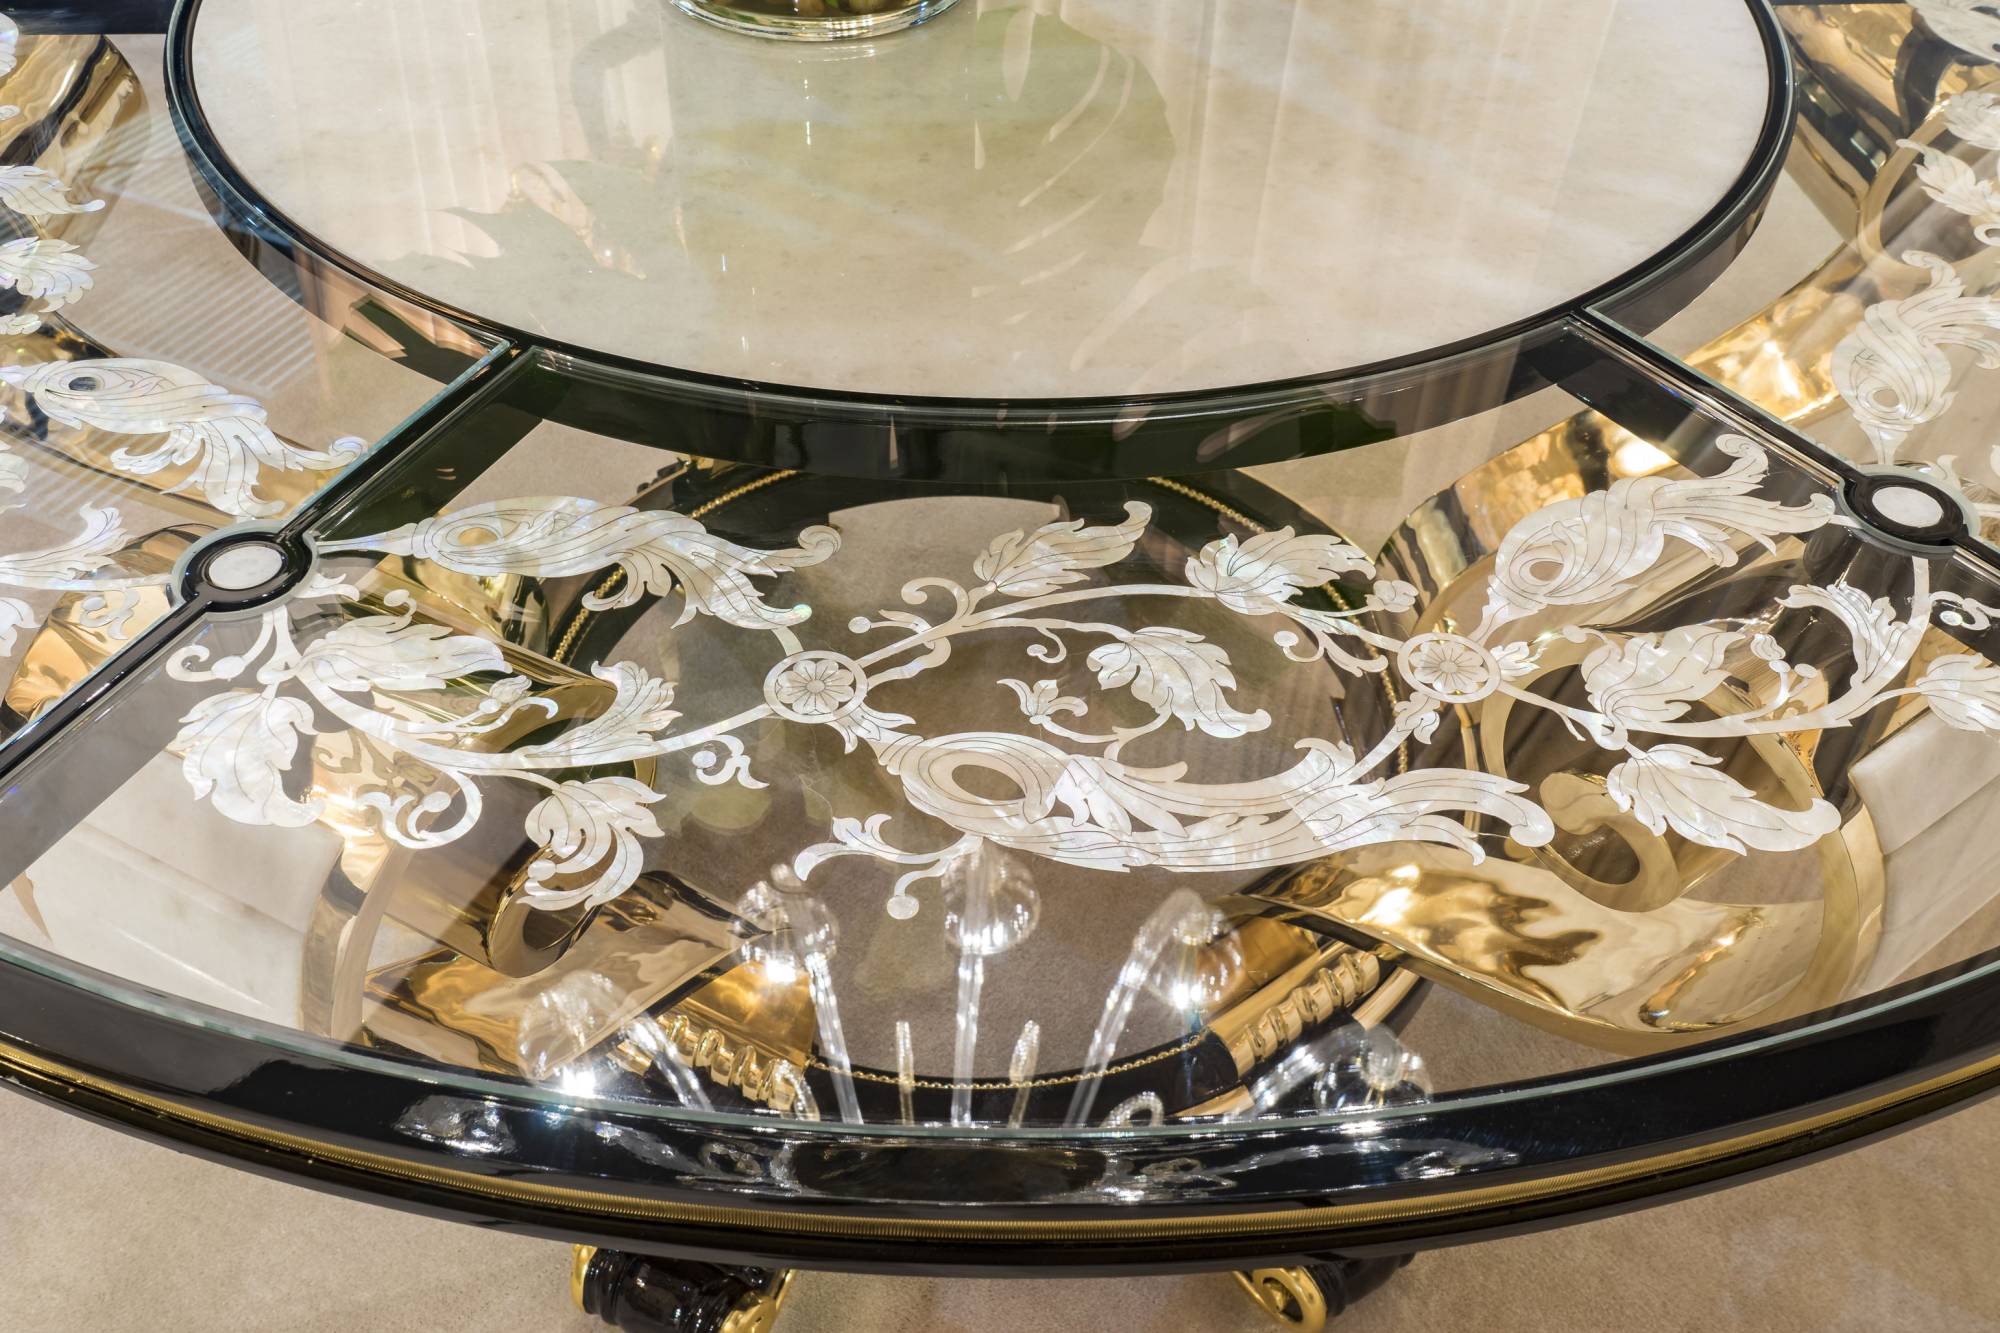 ART. 2084 – The elegance of luxury classic Tables made in Italy by C.G. Capelletti.